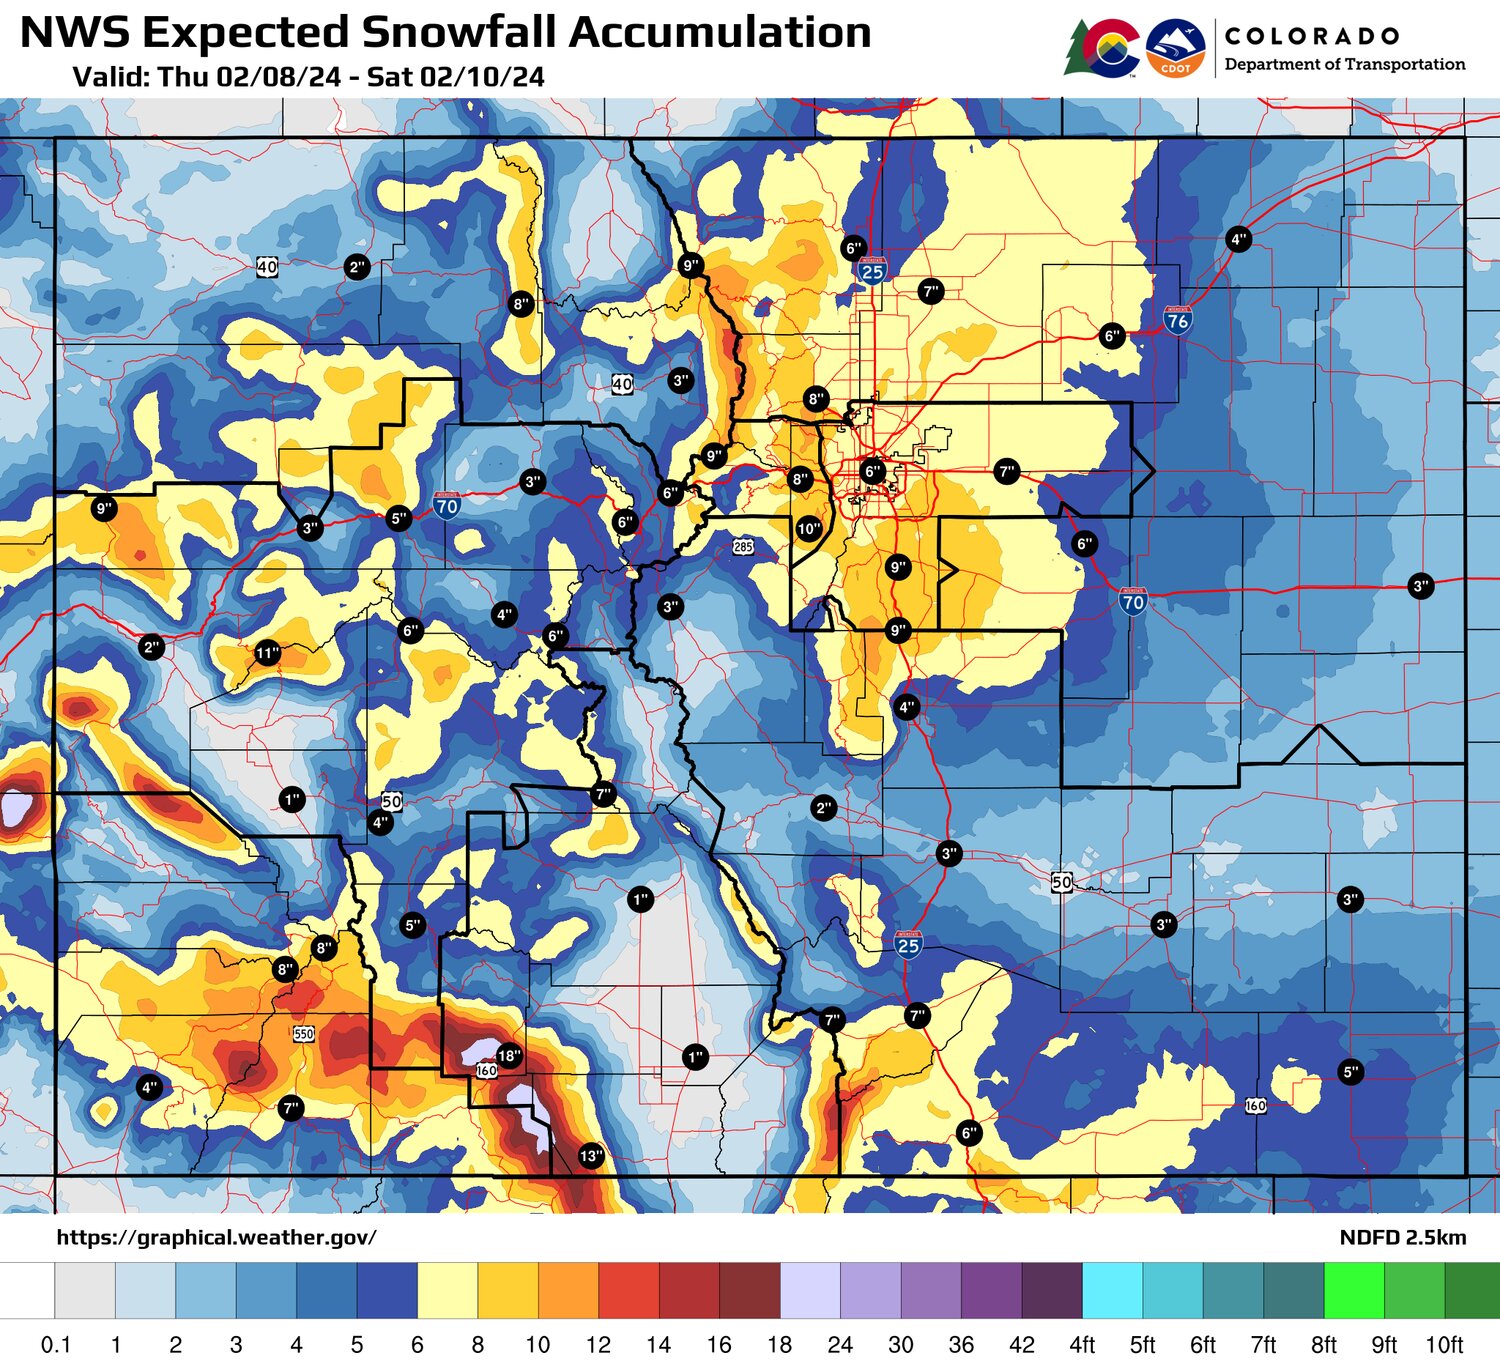 Colorado Department of Transportation and National Weather Service map expected snowfall accumulation map showing highway totals Thursday, Feb. 8, through Saturday, Feb. 10.